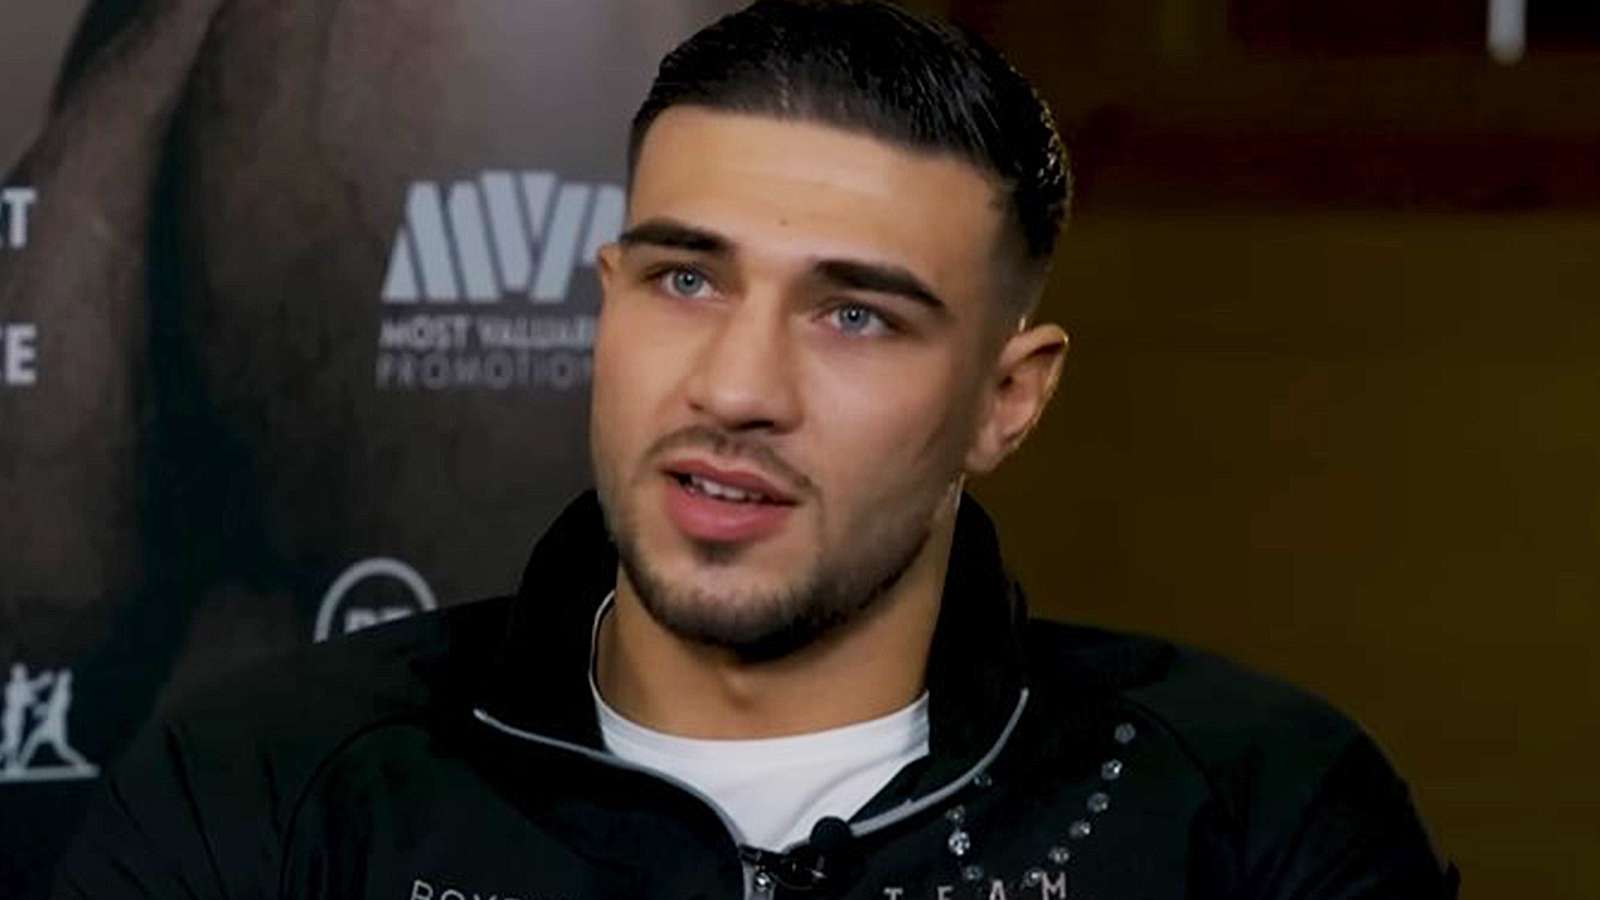 Tommy Fury says he'll retire if he loses jake paul fight